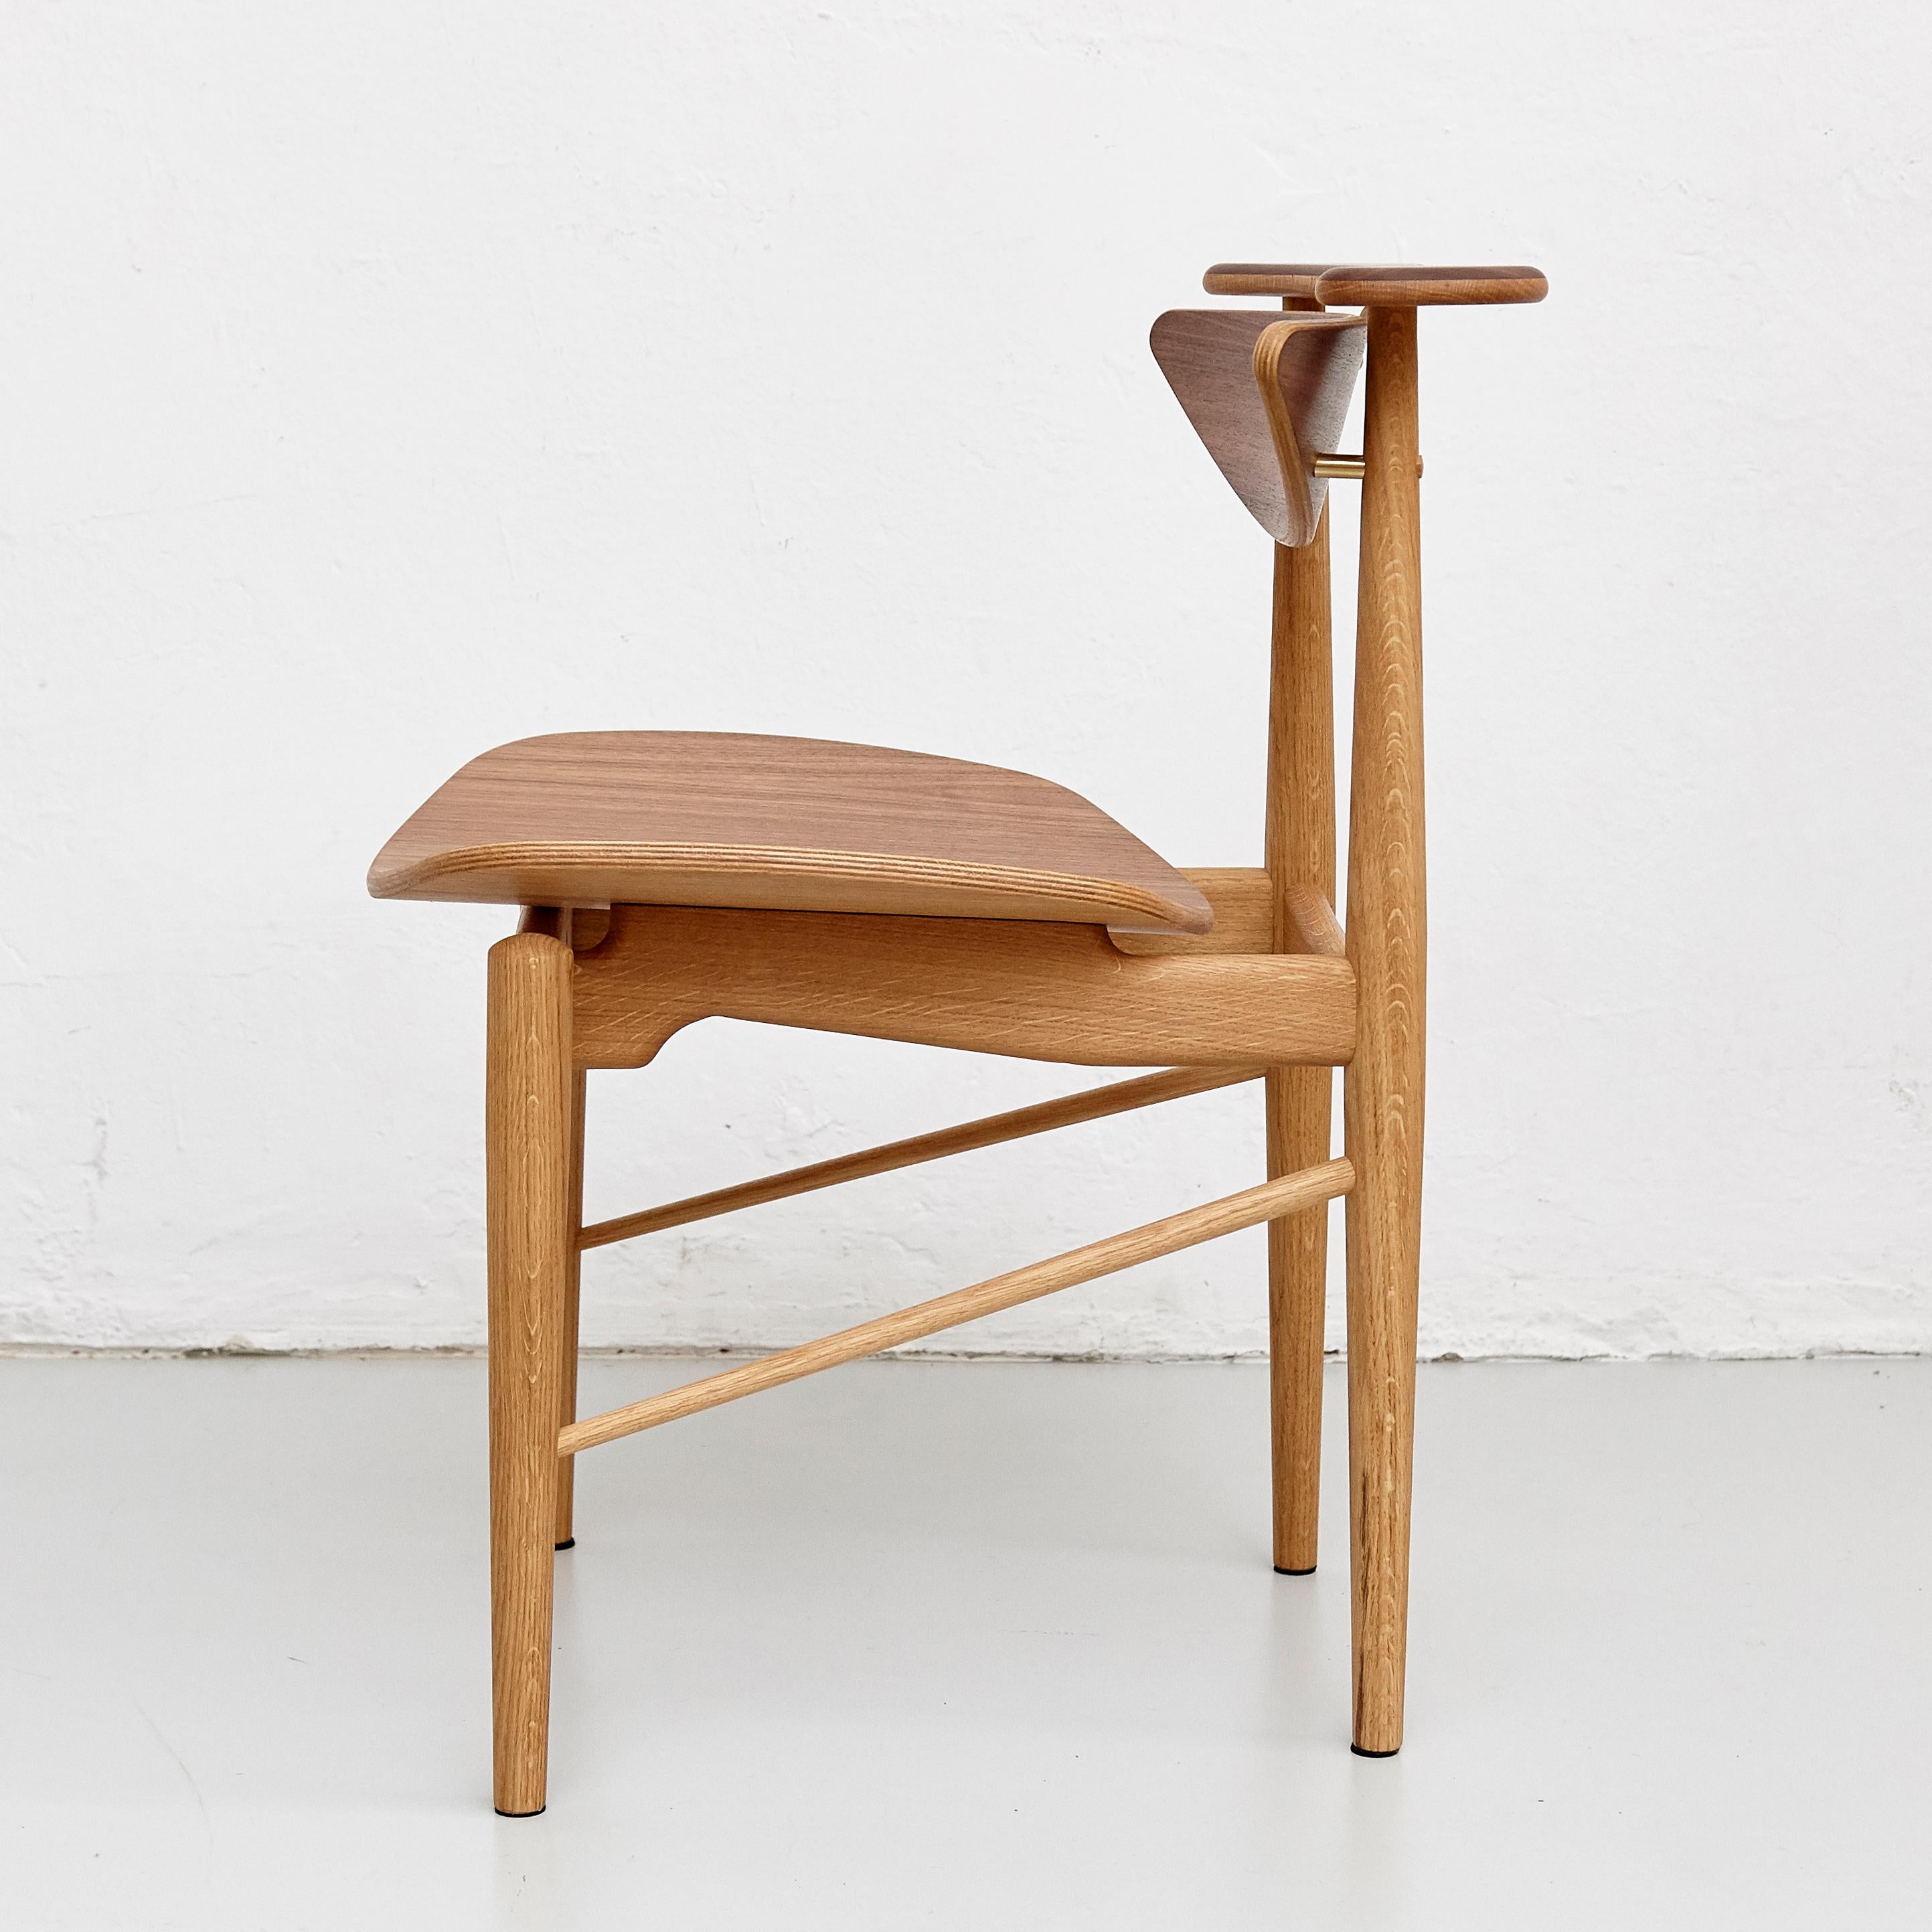 Chair designed by Finn Juhl in 1953, relaunched in 2015.
Manufactured by House of Finn Juhl in Denmark.

The Reading chair is one of Finn Juhl's more simple, yet elegant, pieces. The chair is characterized by intricate details and a quirky story.